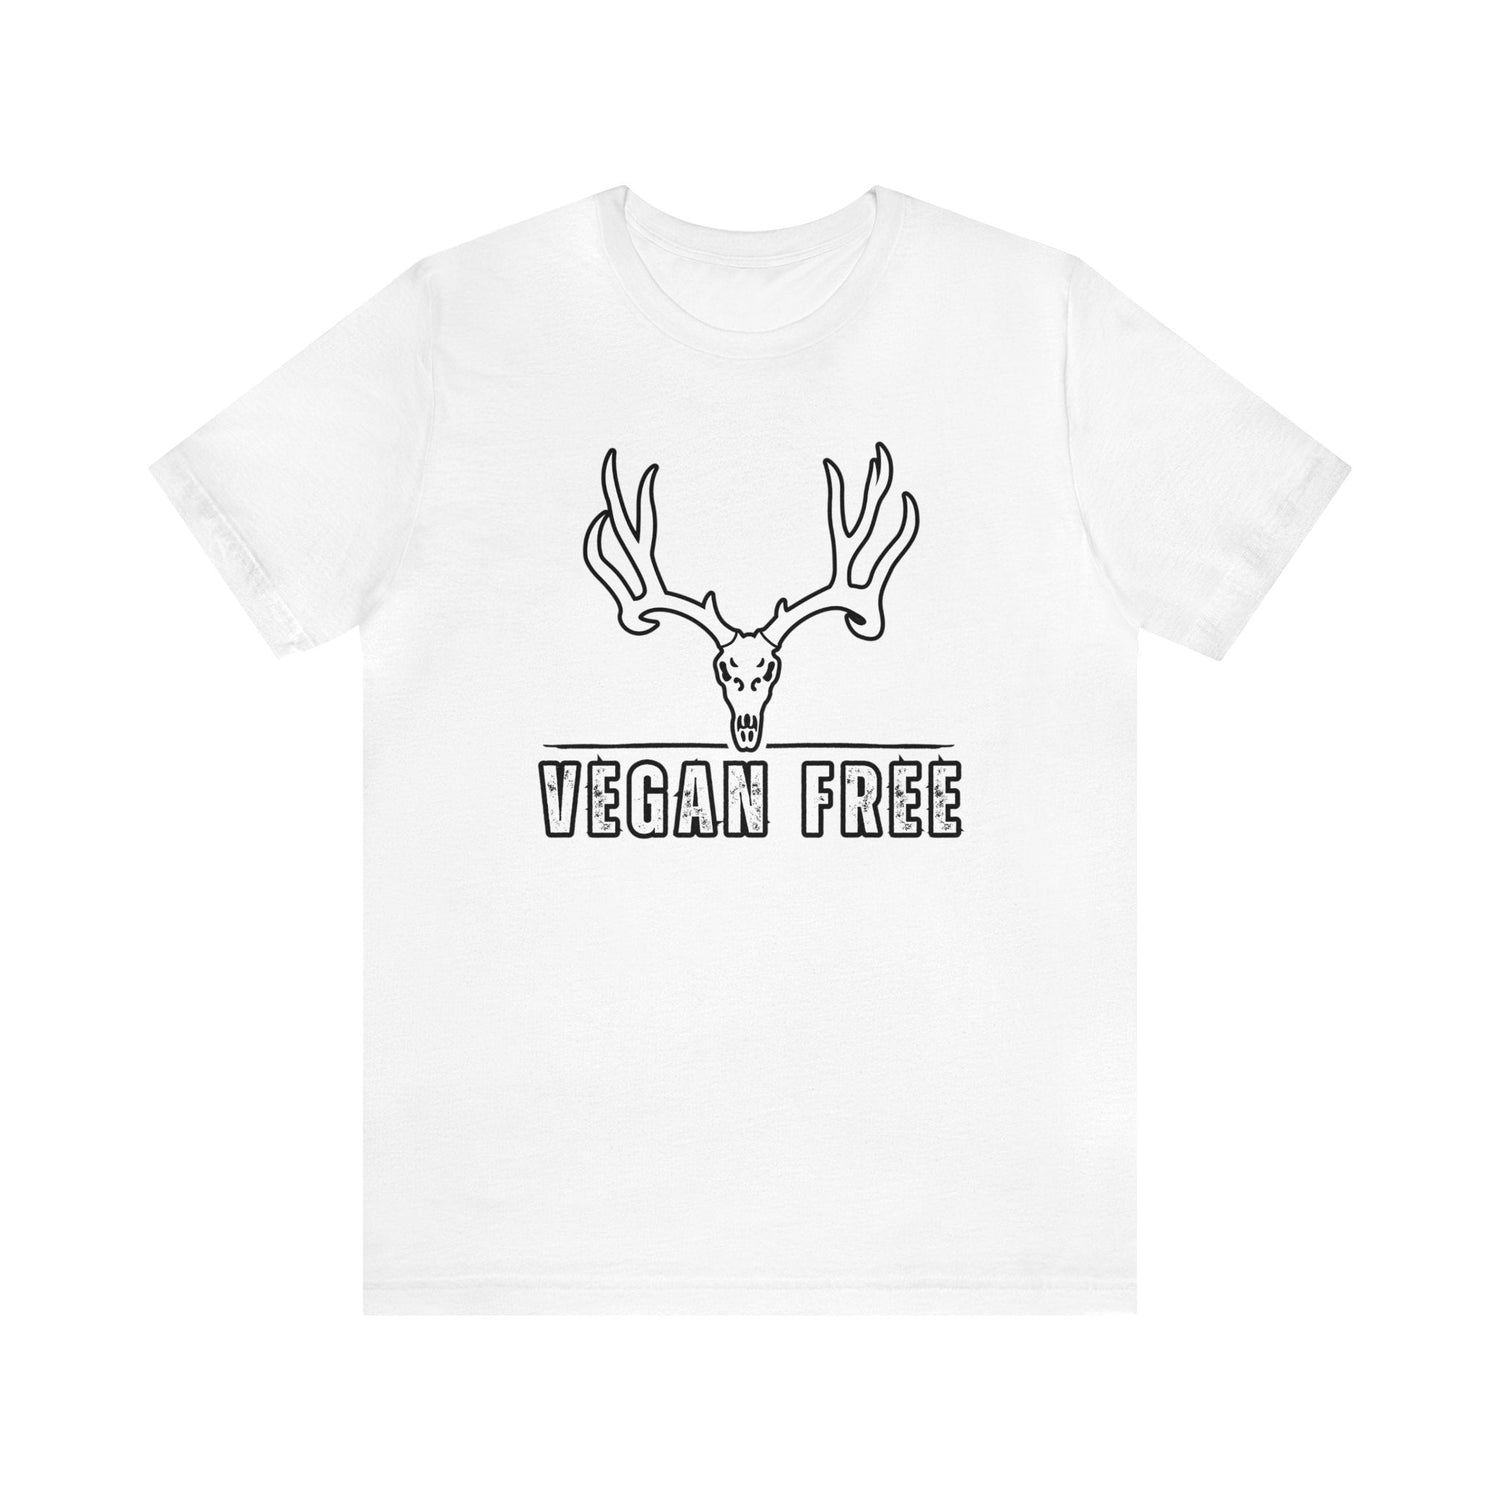 Western deer hunting t-shirt, color white, front design placement